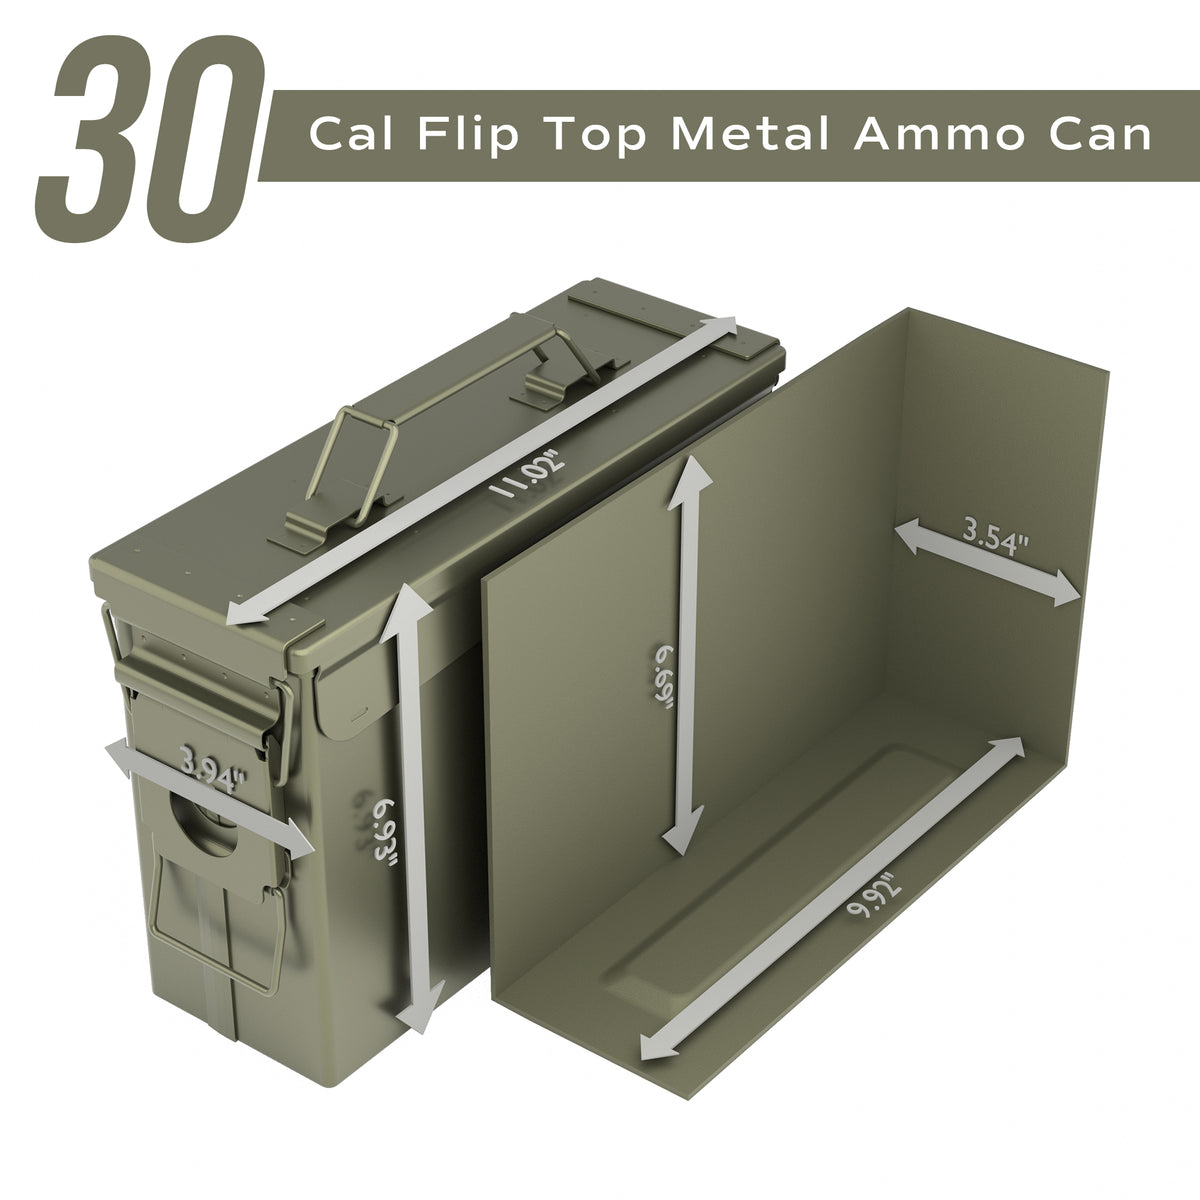 RPNB Metal Ammo Can .30 Cal, Military Heavy Gauge Steel Water Resistant Ammo Box for Handgun Ammo Storage